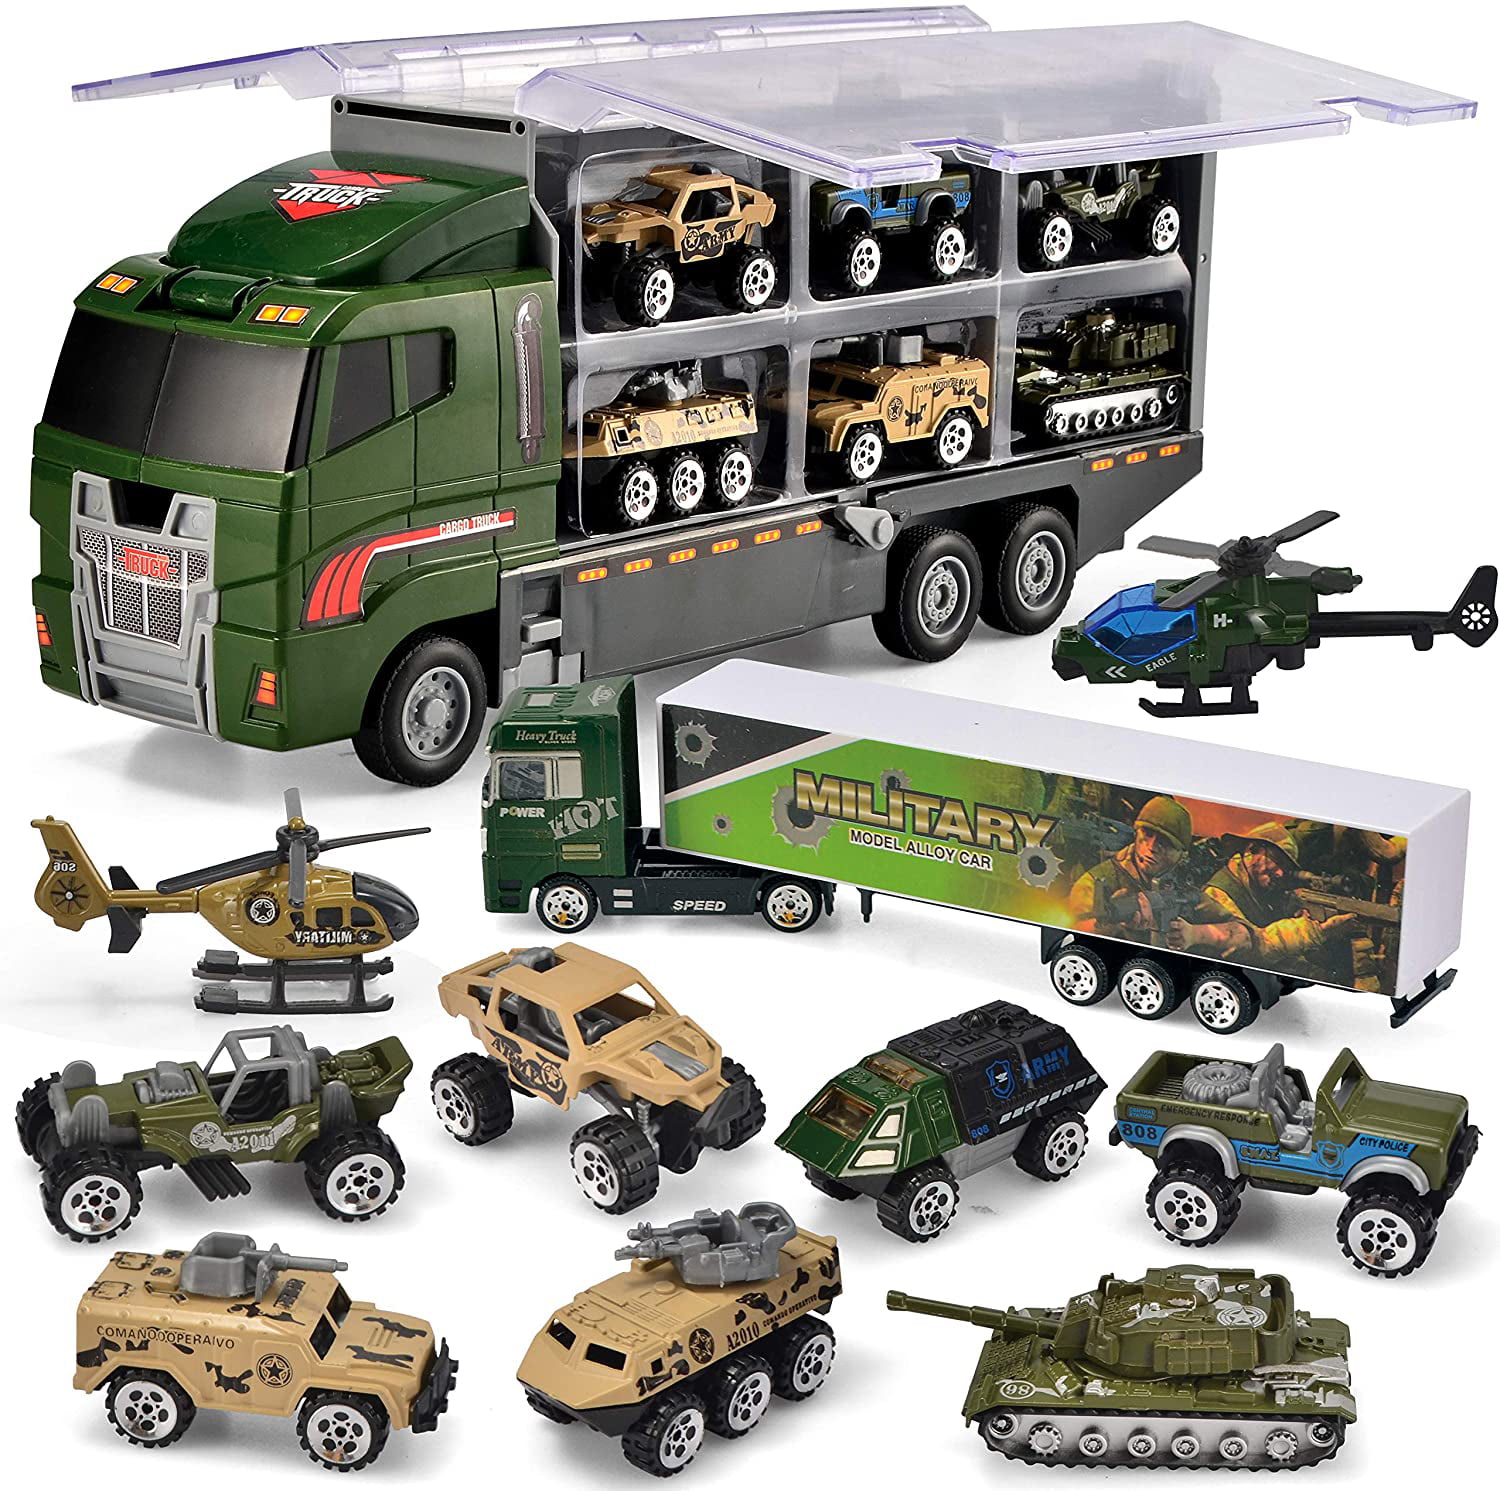 Cyber Monday Die-cast Military Vehicles Assorted Alloy Metal Army Vehicle Models 